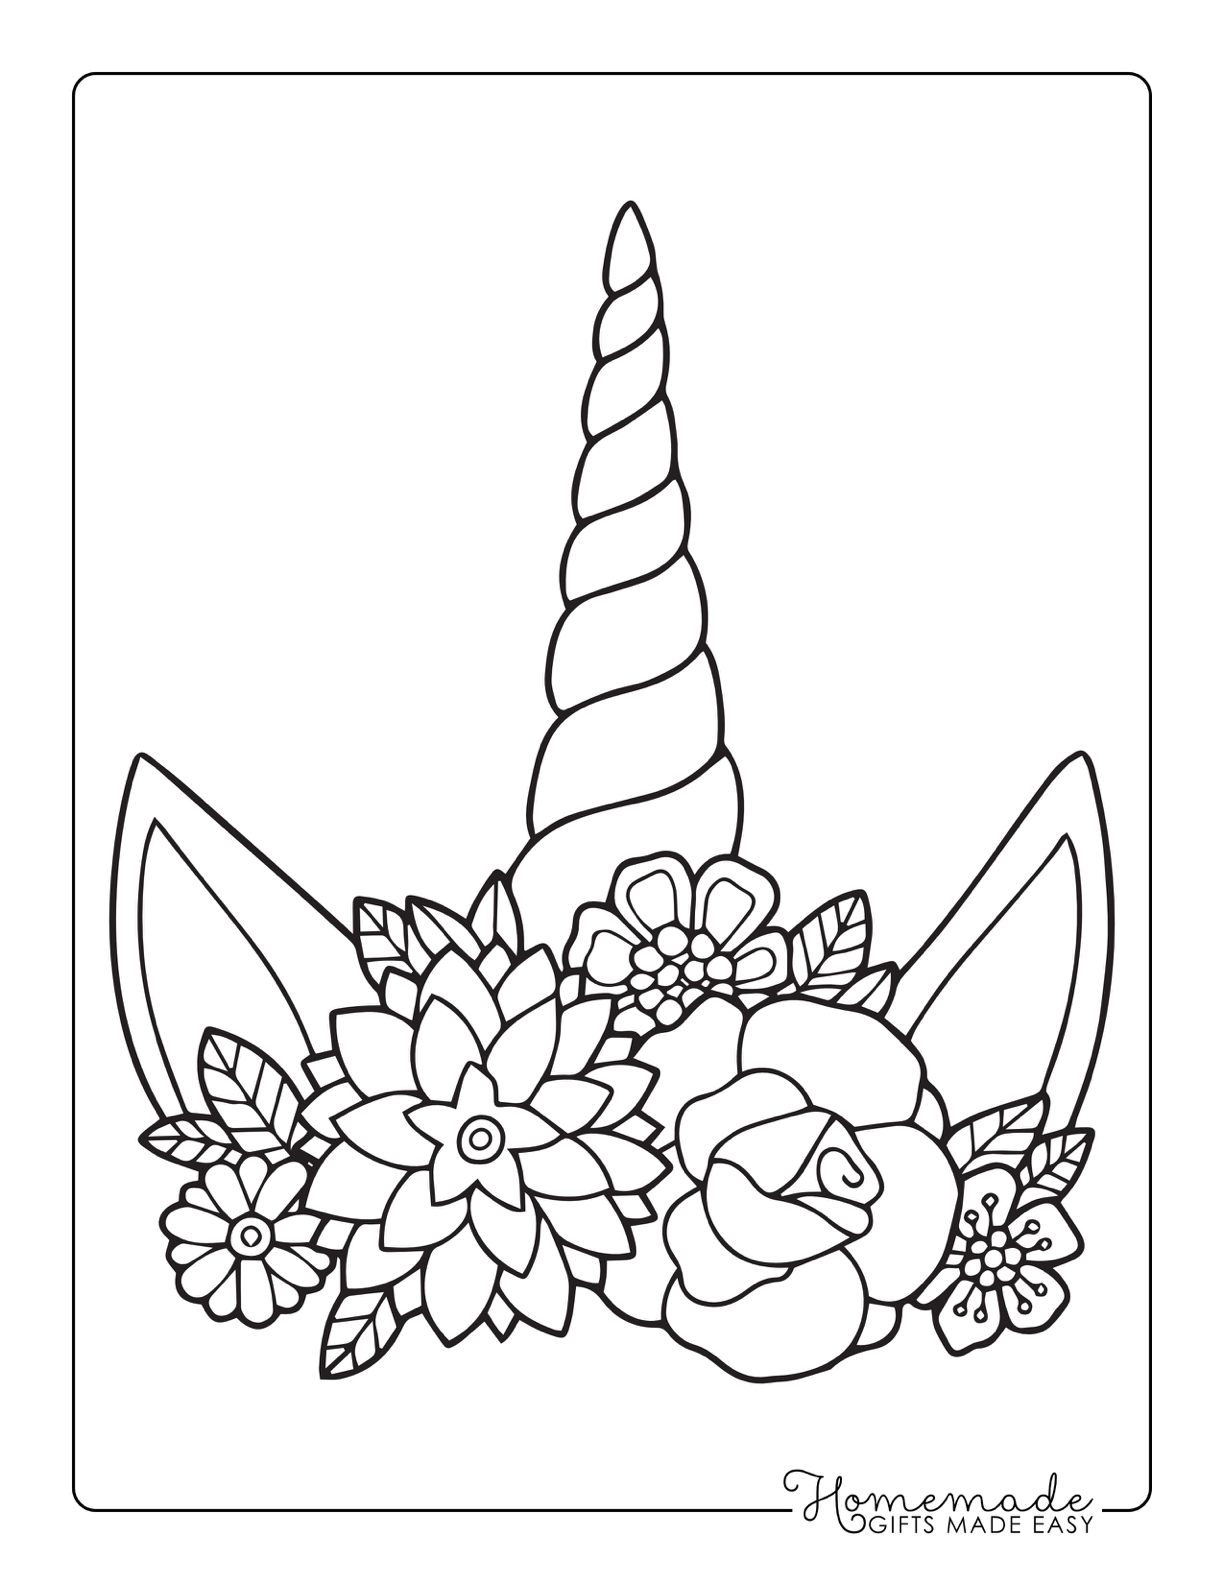 Best unicorn coloring pages